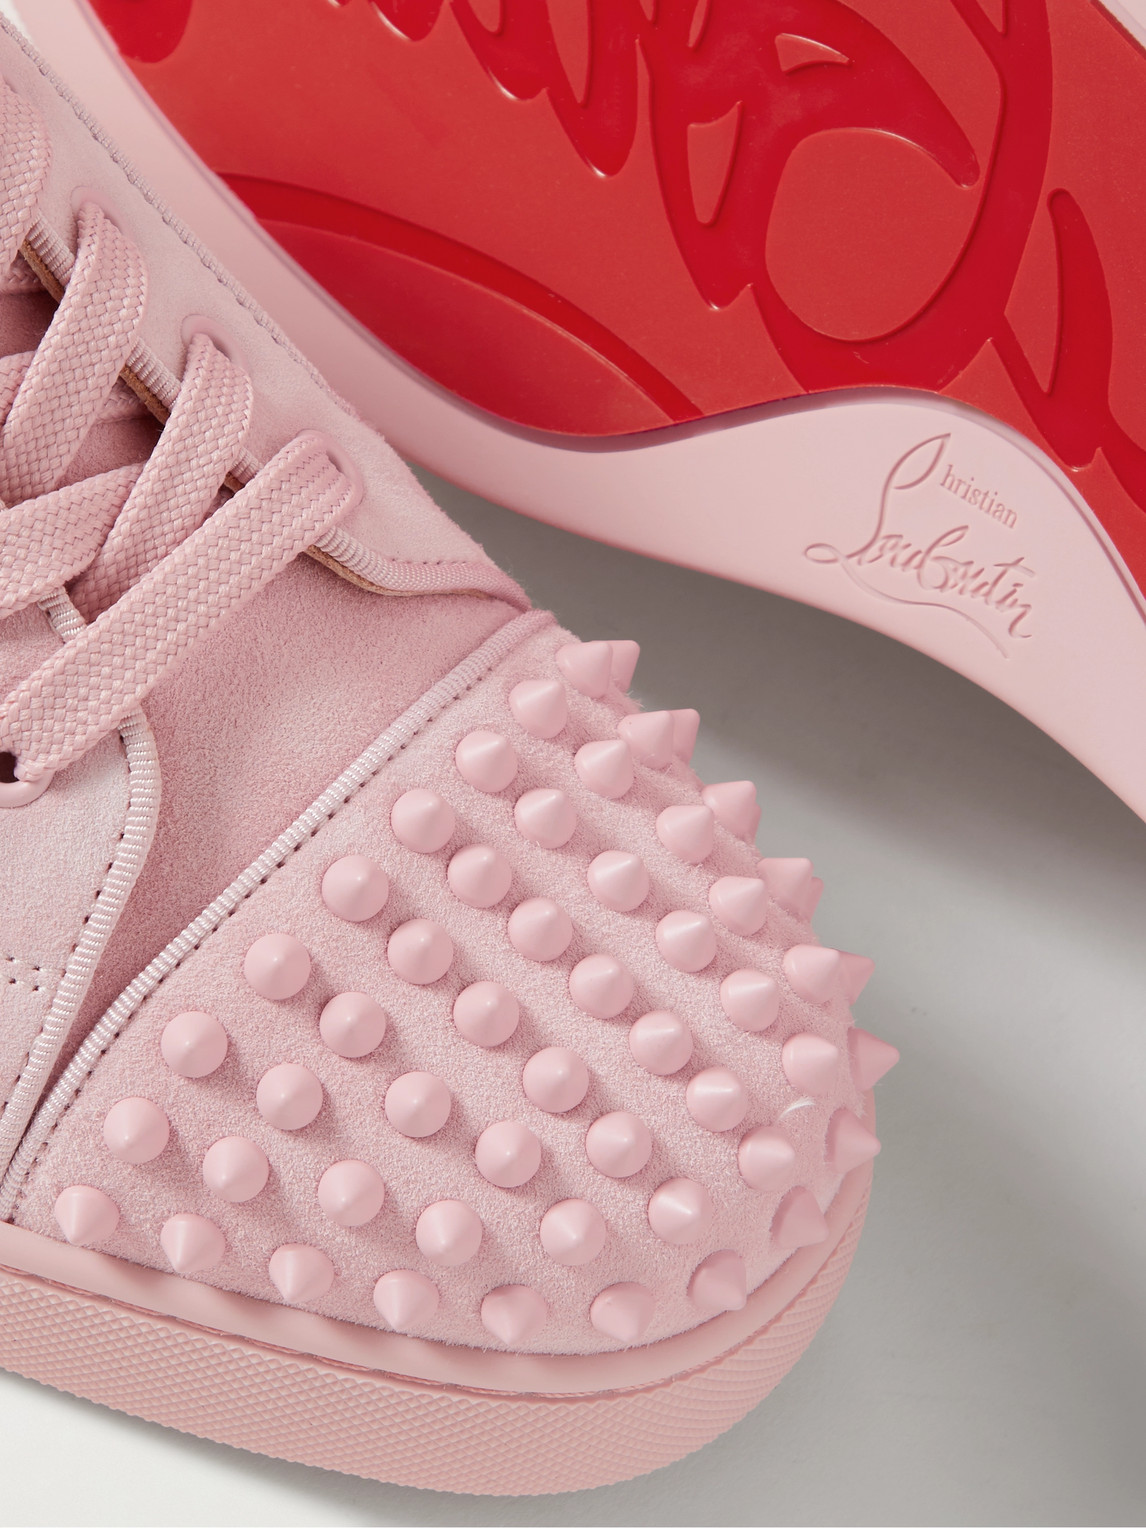 Christian Louboutin Louis Junior Spikes Cap-toe Suede Sneakers In Rosy/rosy  Mat